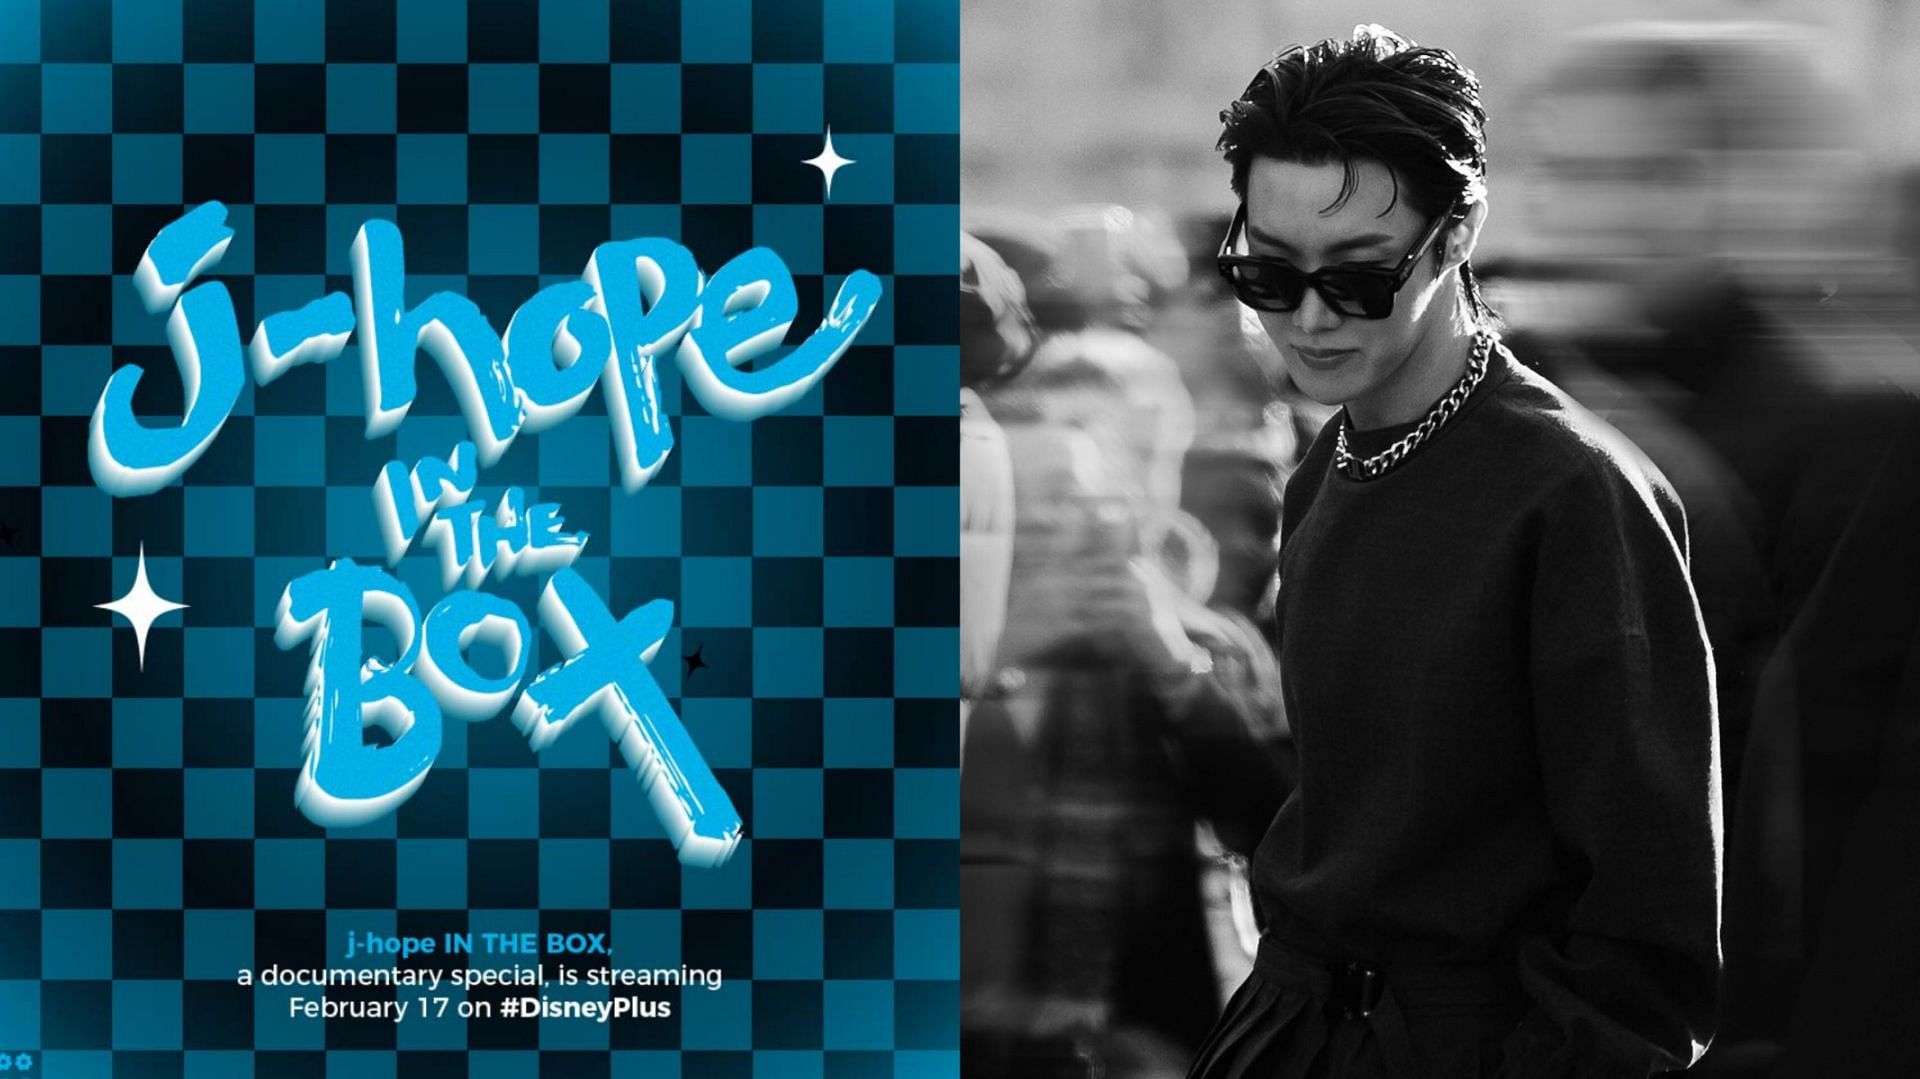 J-Hope Is Now The MVP Of Fashion Week